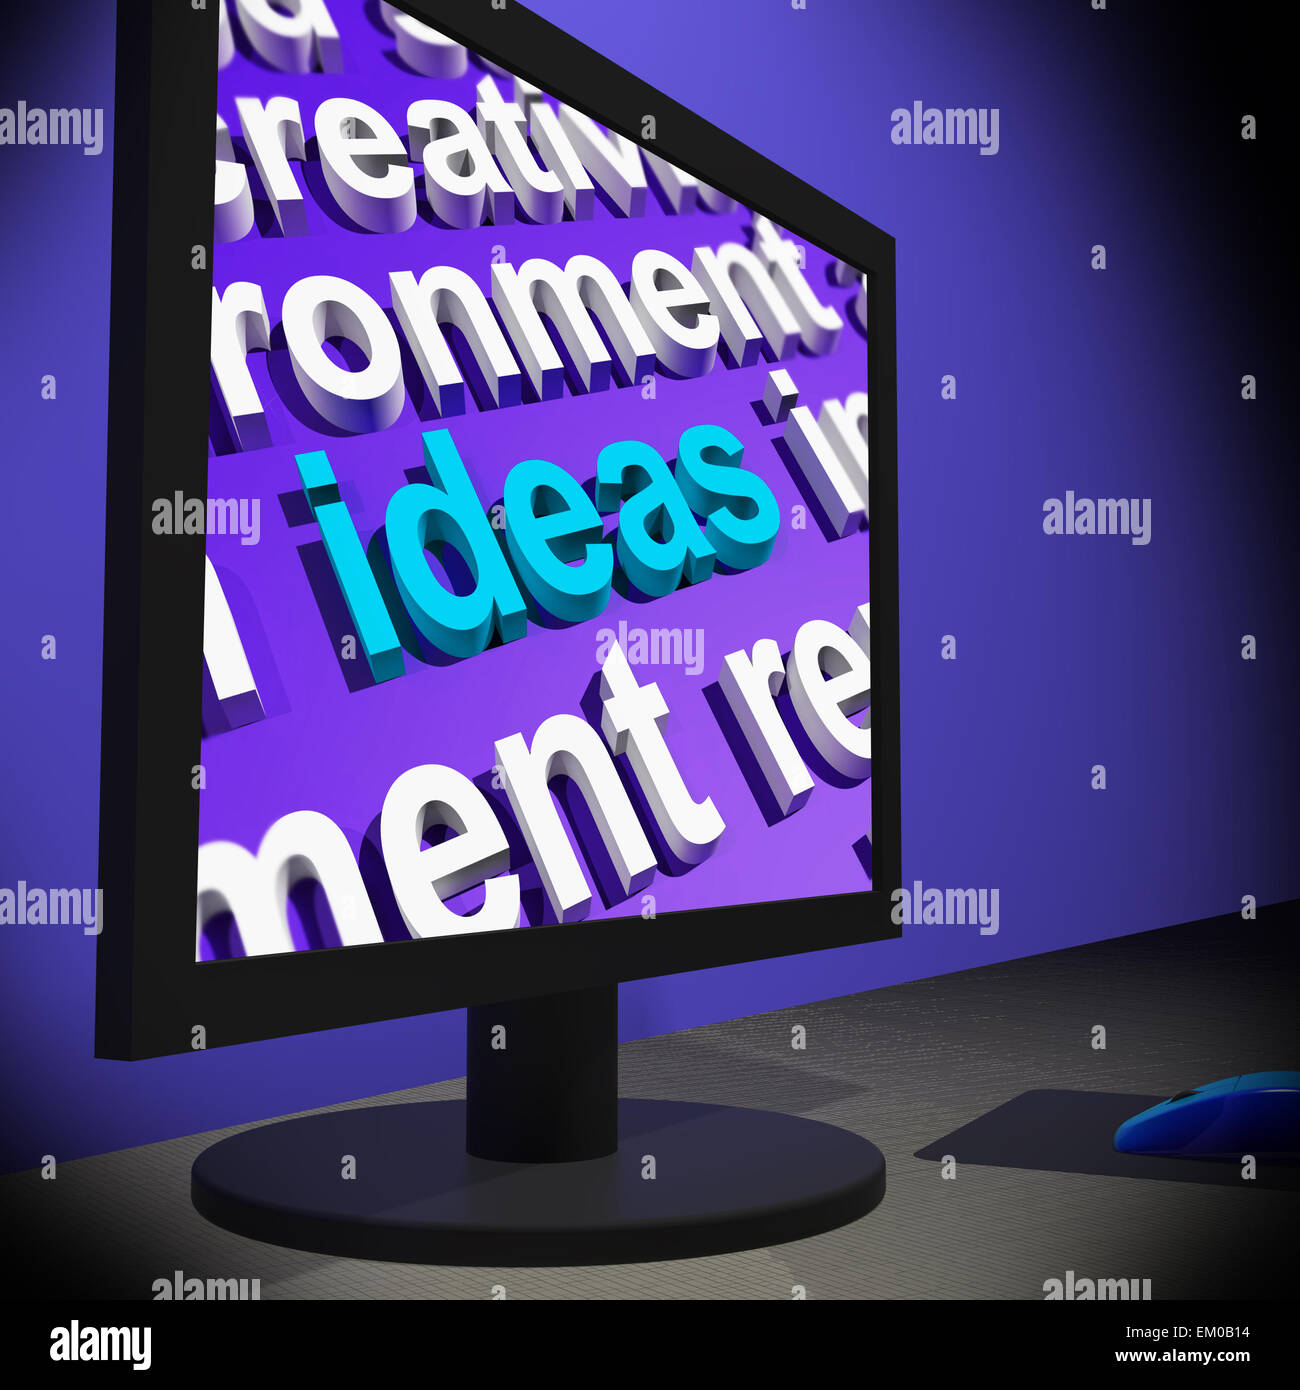 Ideas On Monitor Showing New Inventions s Stock Photo